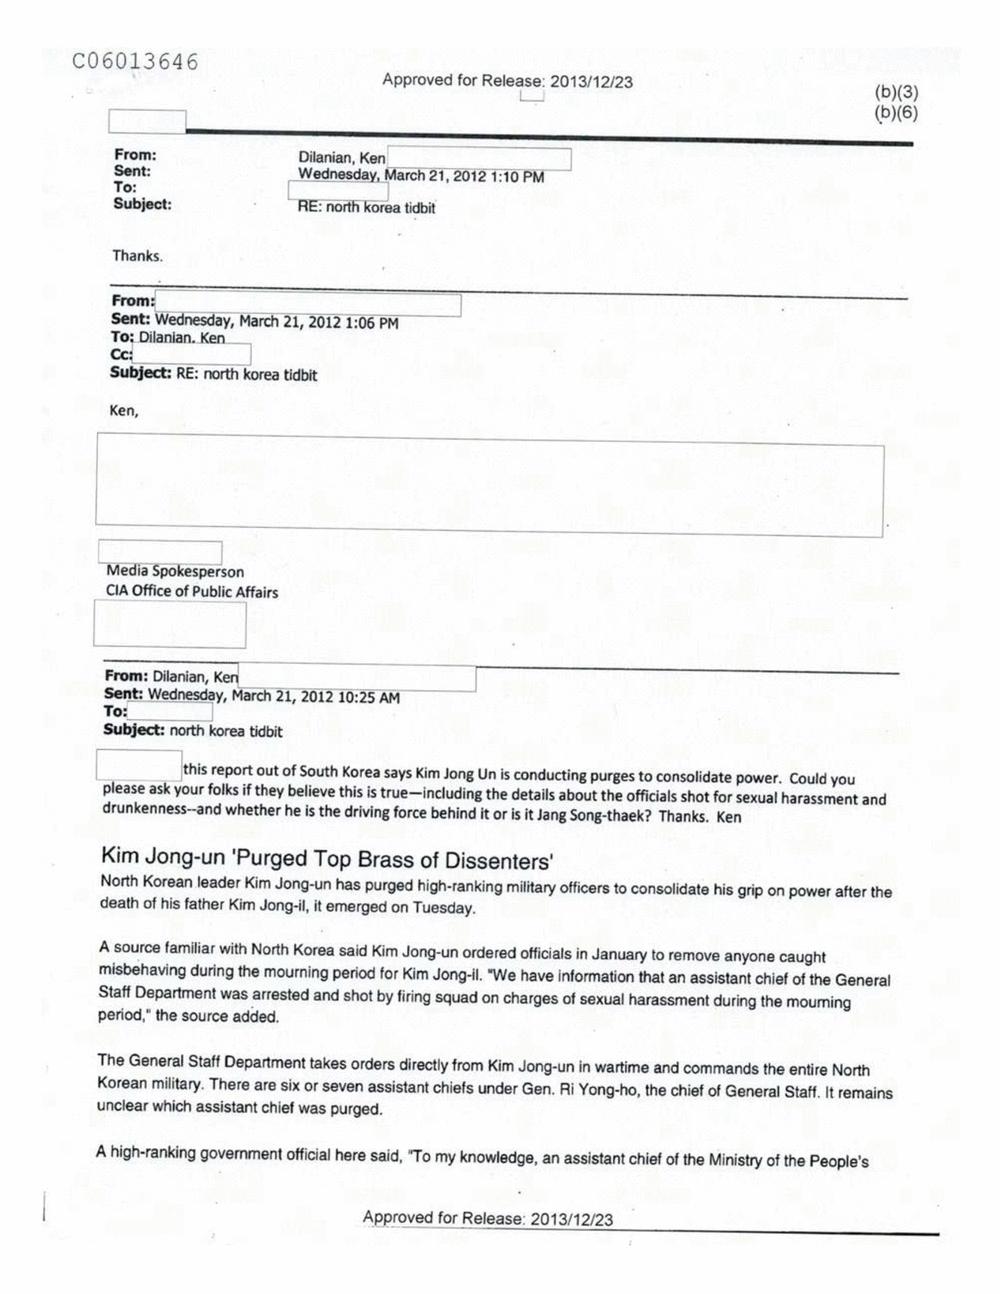 Page 487 from Email Correspondence Between Reporters and CIA Flacks